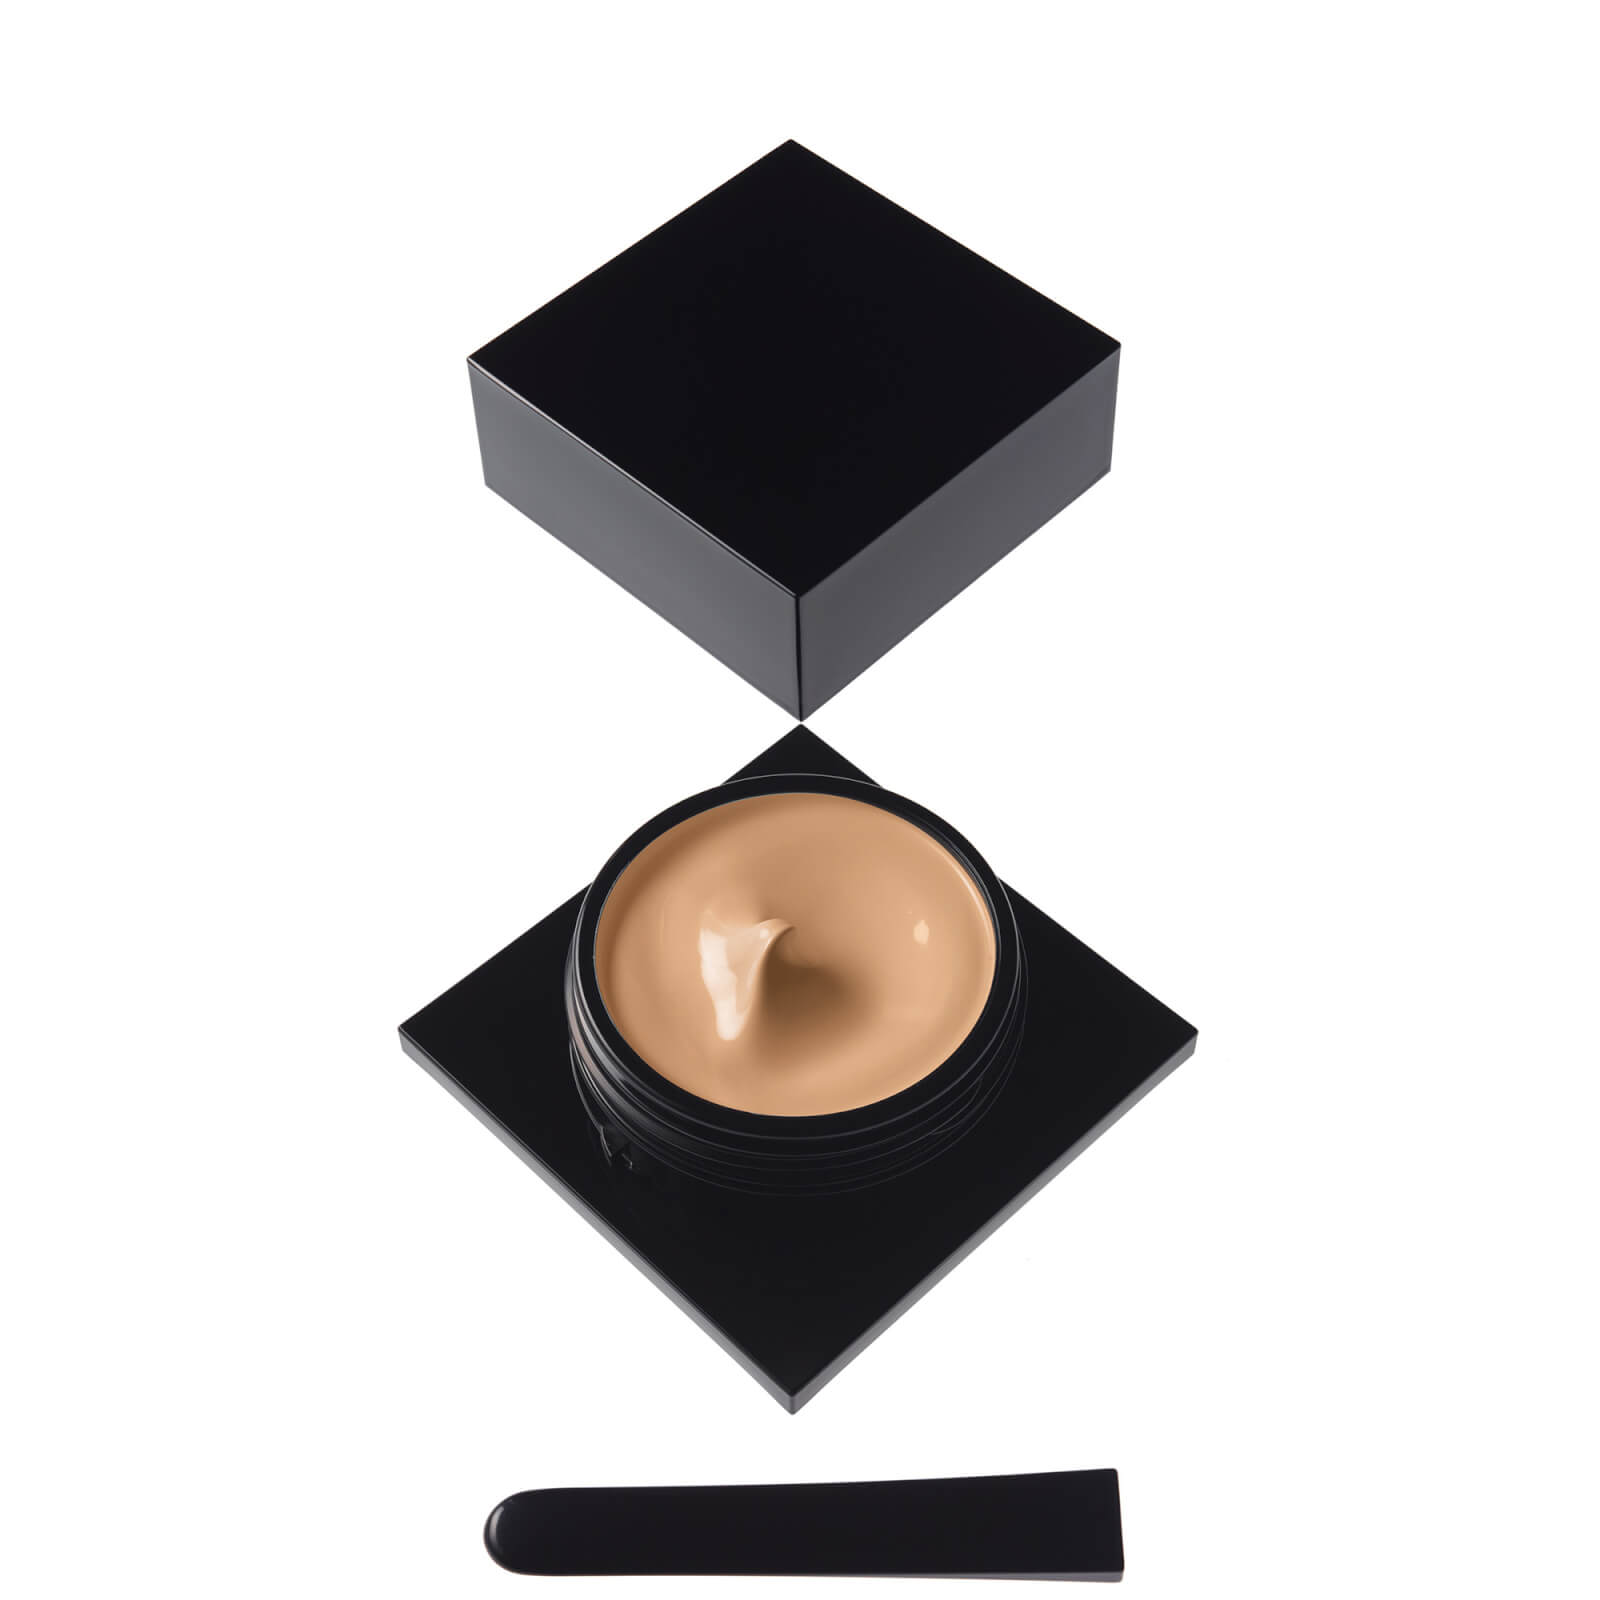 Serge Lutens Spectral Cream Foundation 30ml (Various Shades) - O40